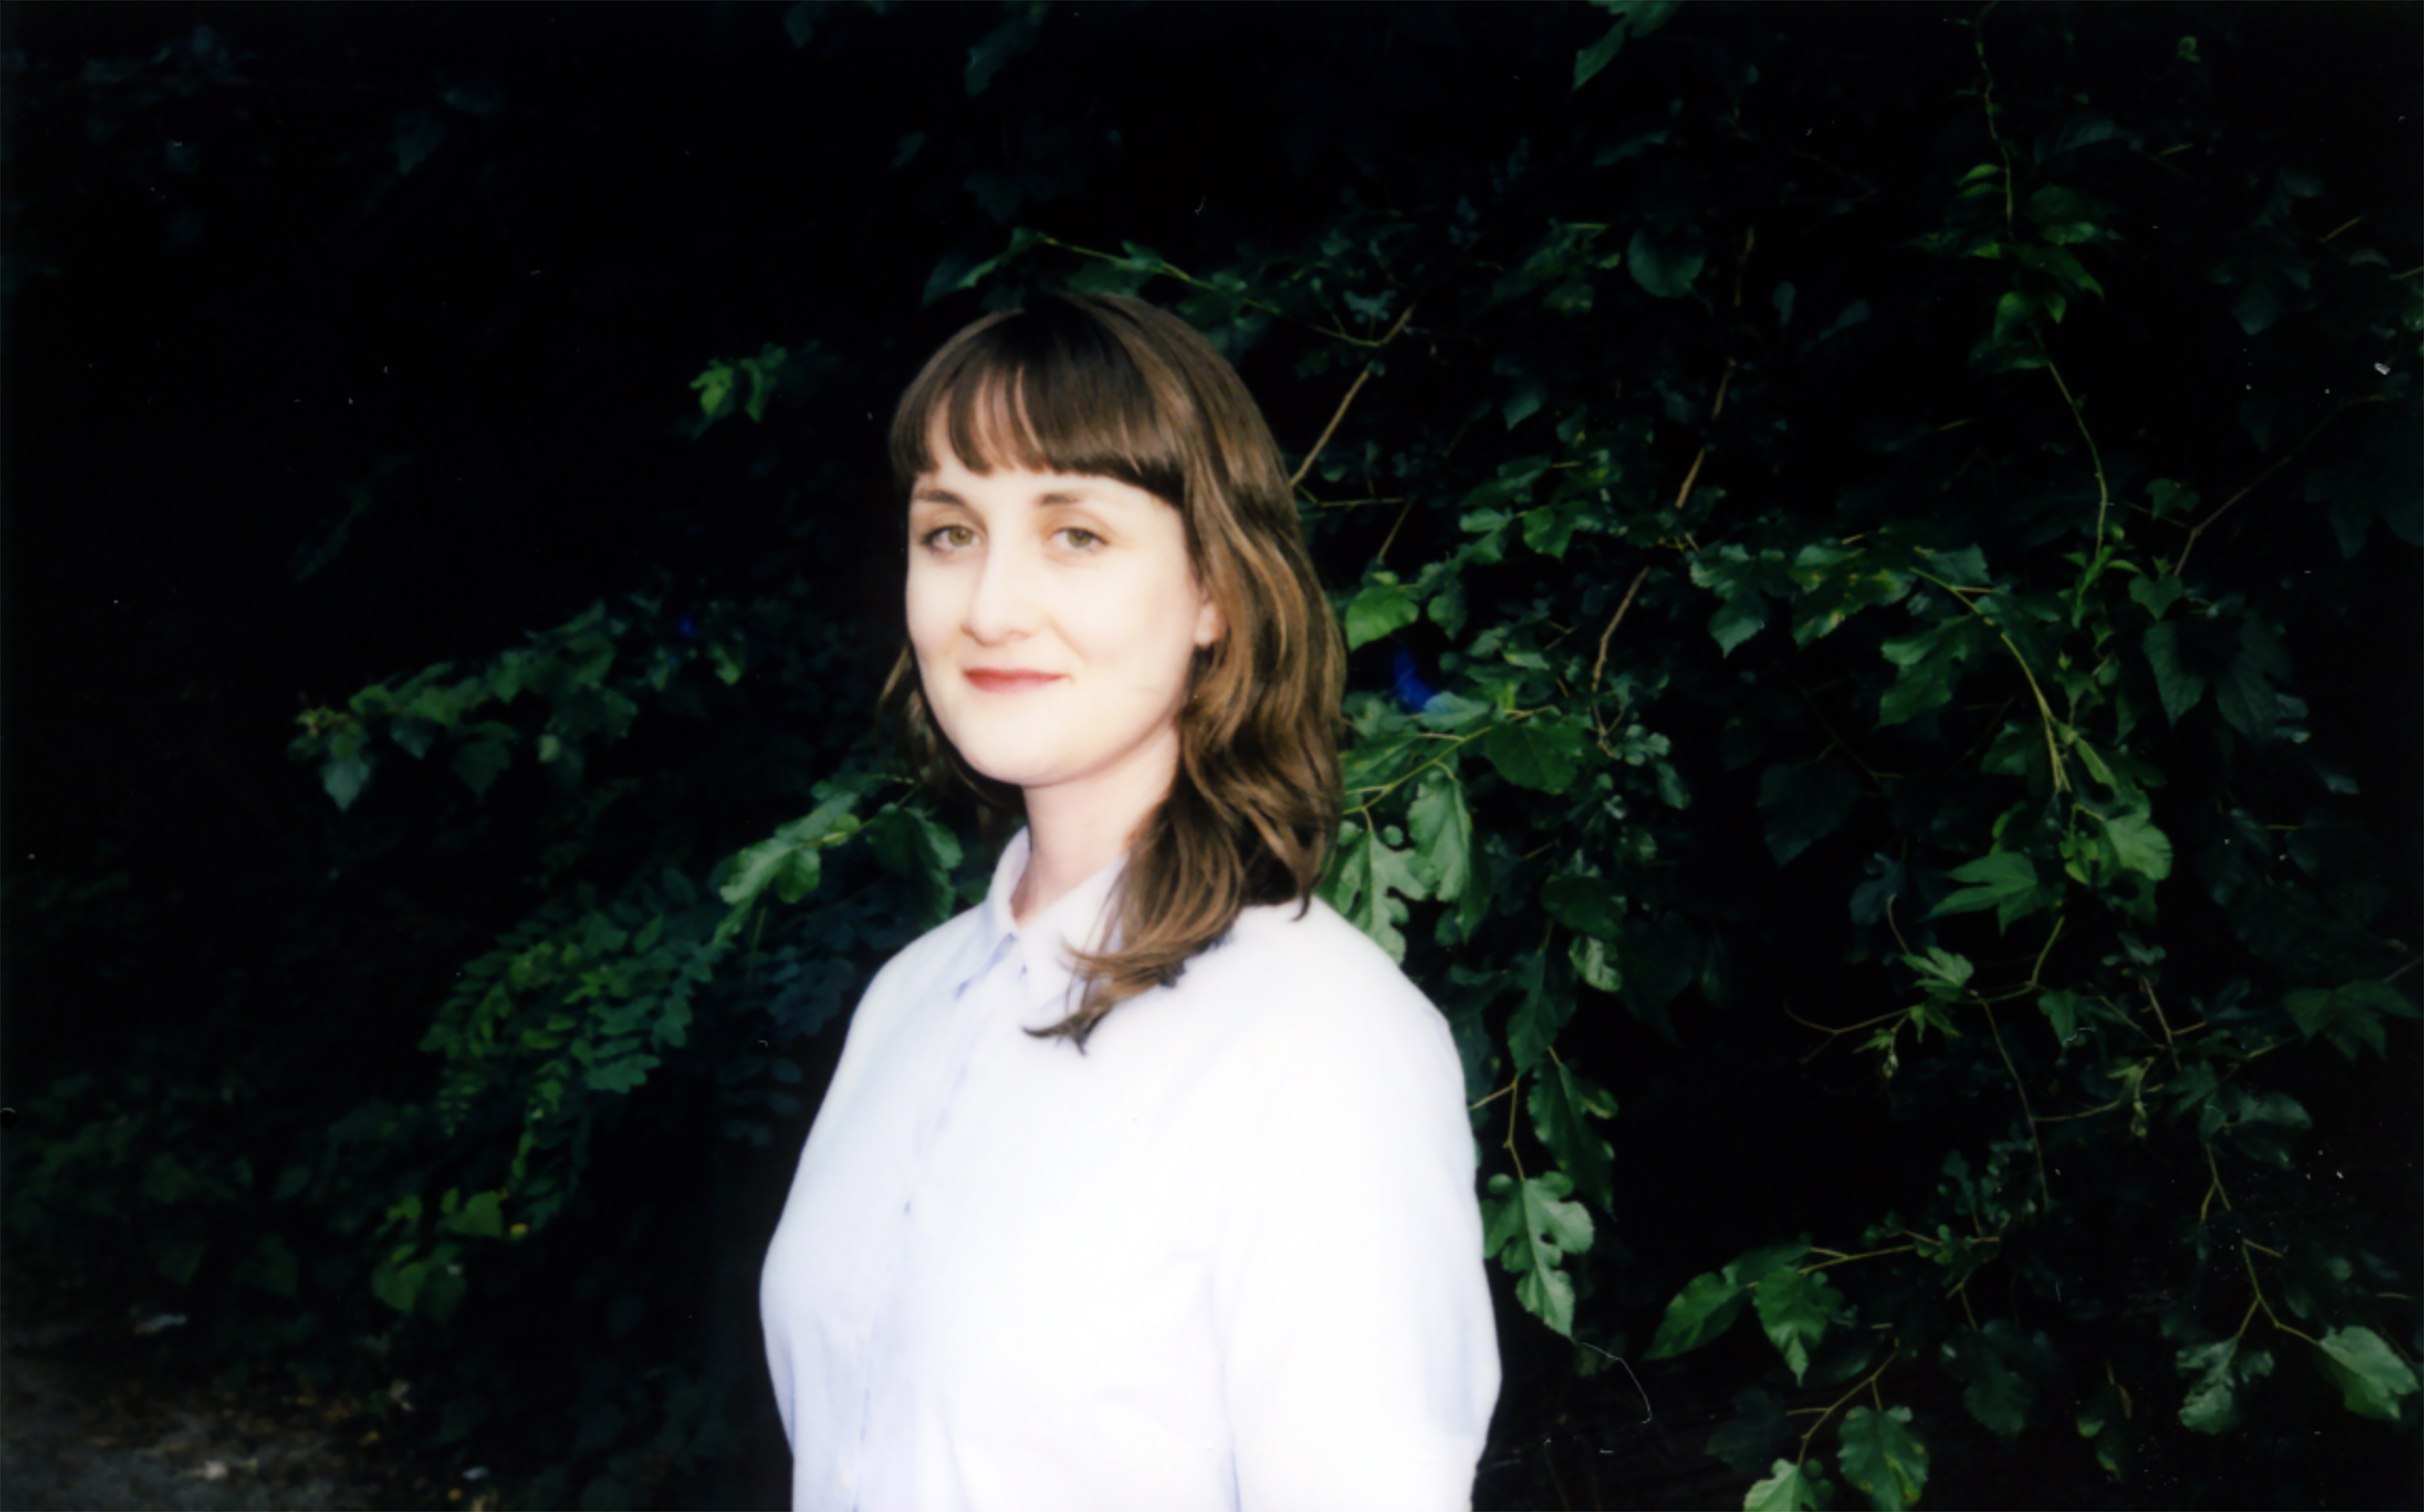 A white woman with brown hair in a light blue shirt standing in front of a green forest background.